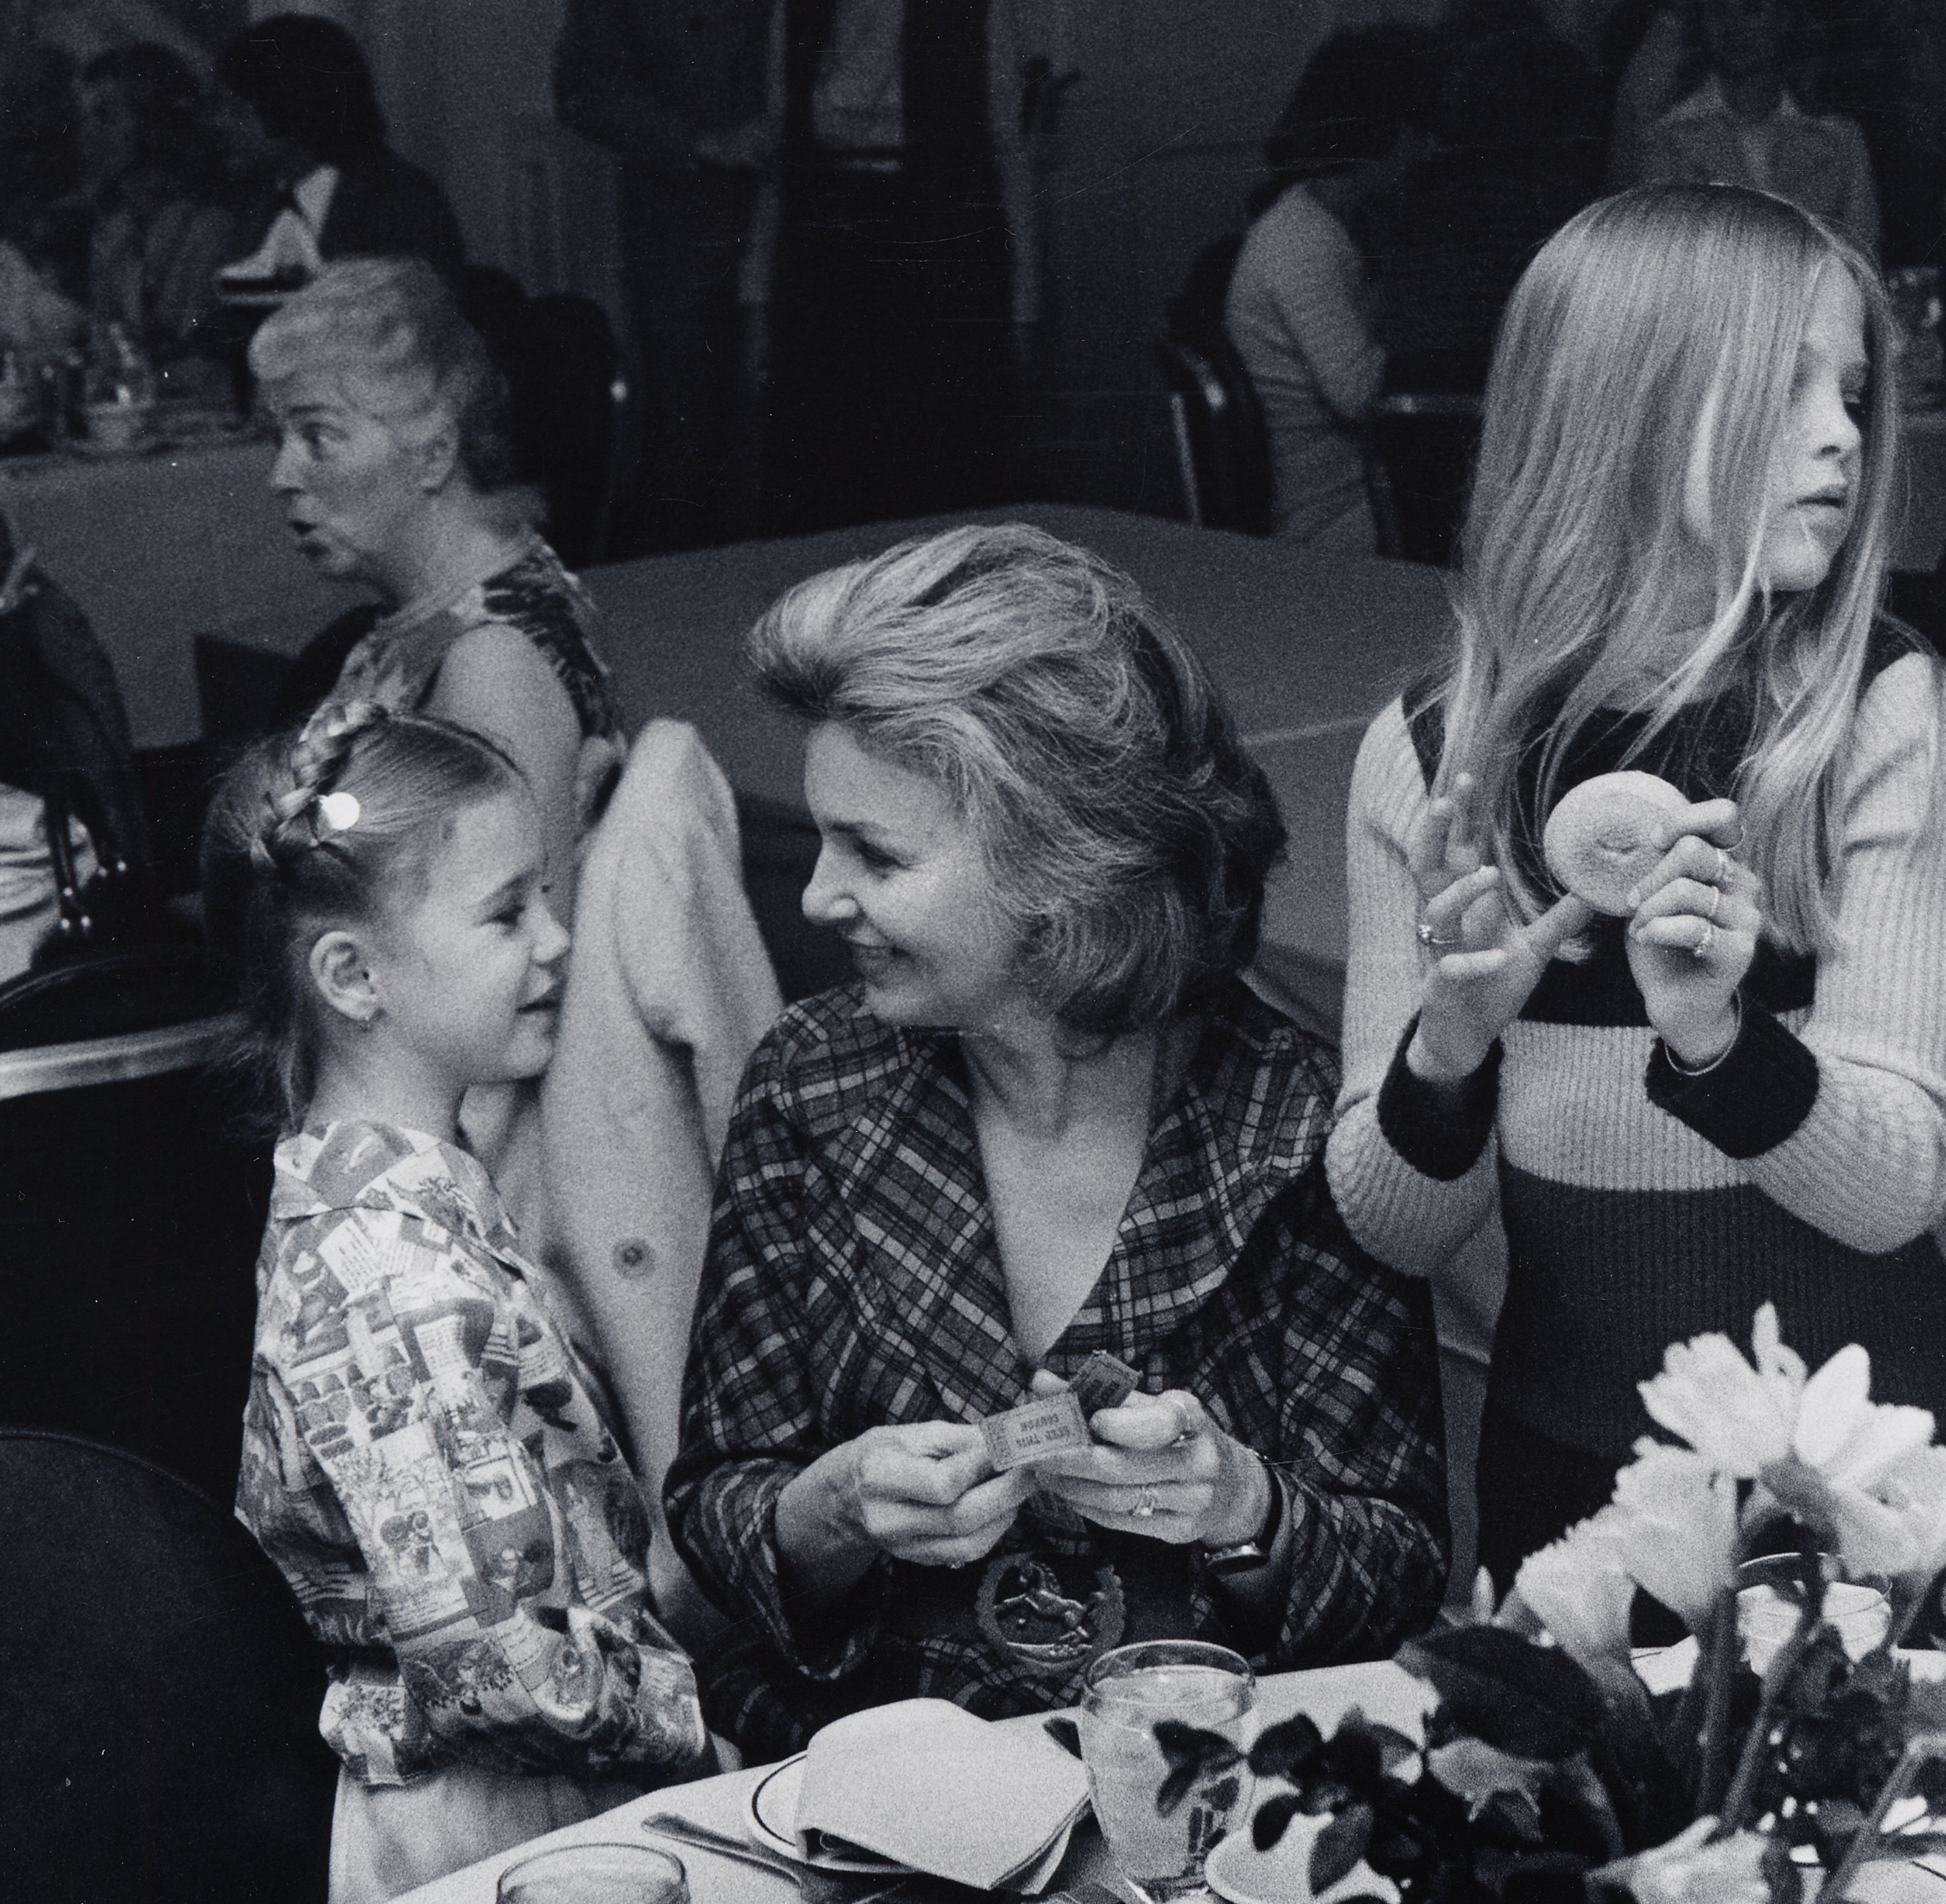 Clea Newman, Joanne Woodward, and Nell Newman during the Ballet Society Luncheon on March 30, 1973, in Bel Air, California | Source: Getty Images